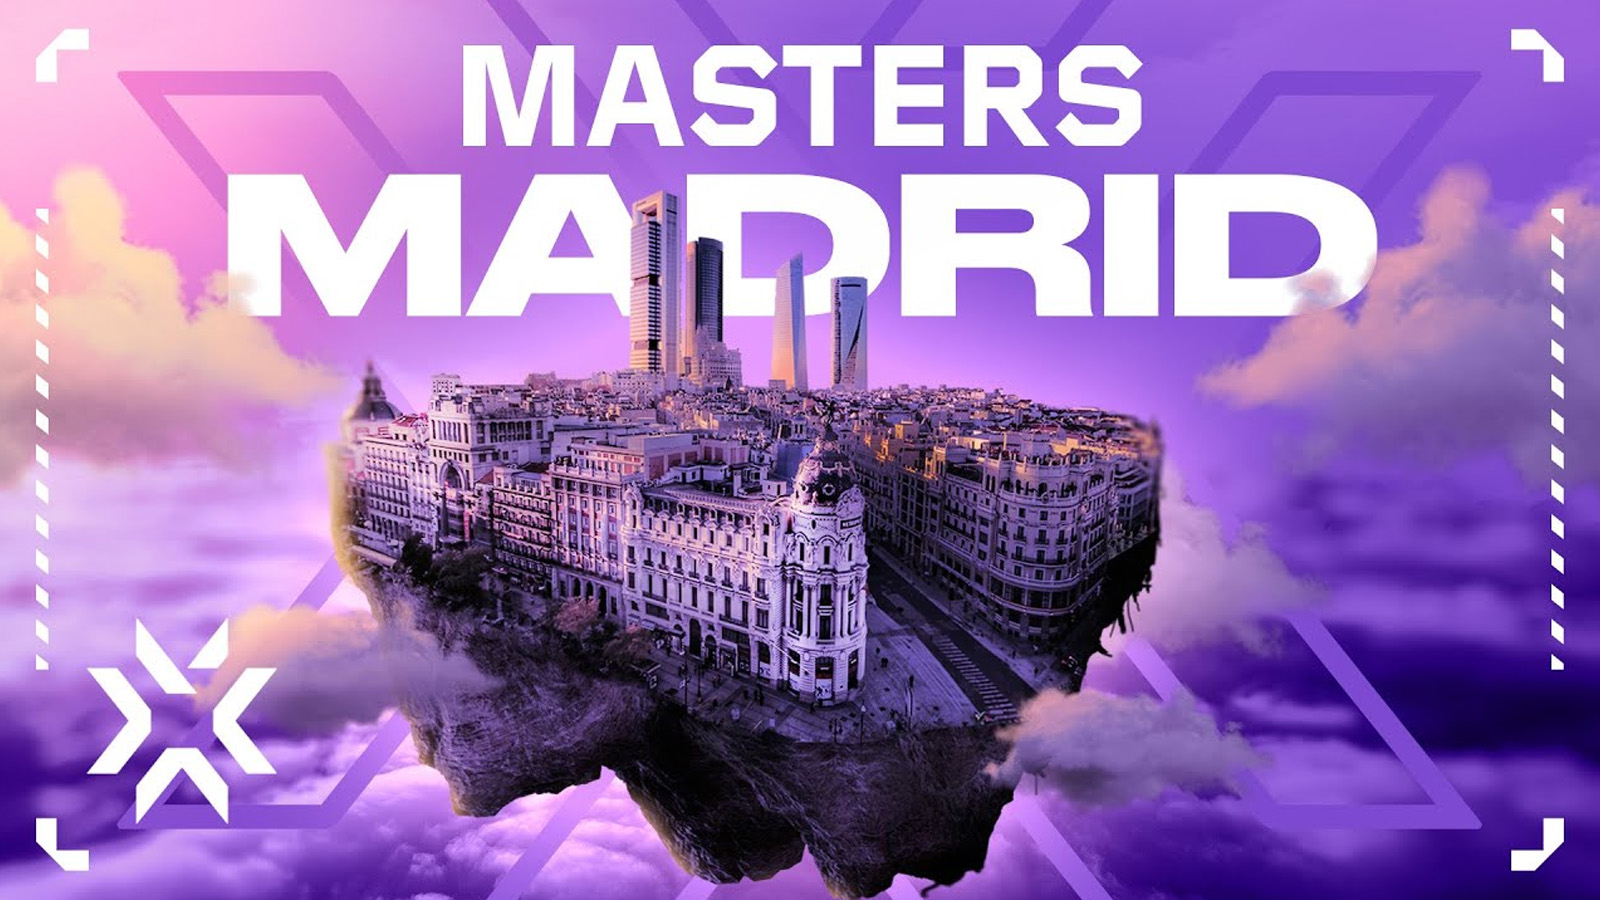 Vct masters madrid. VCT 2024 Madrid Trophy. Madrid 2024. Мастер 2024. Artmasters 2024.